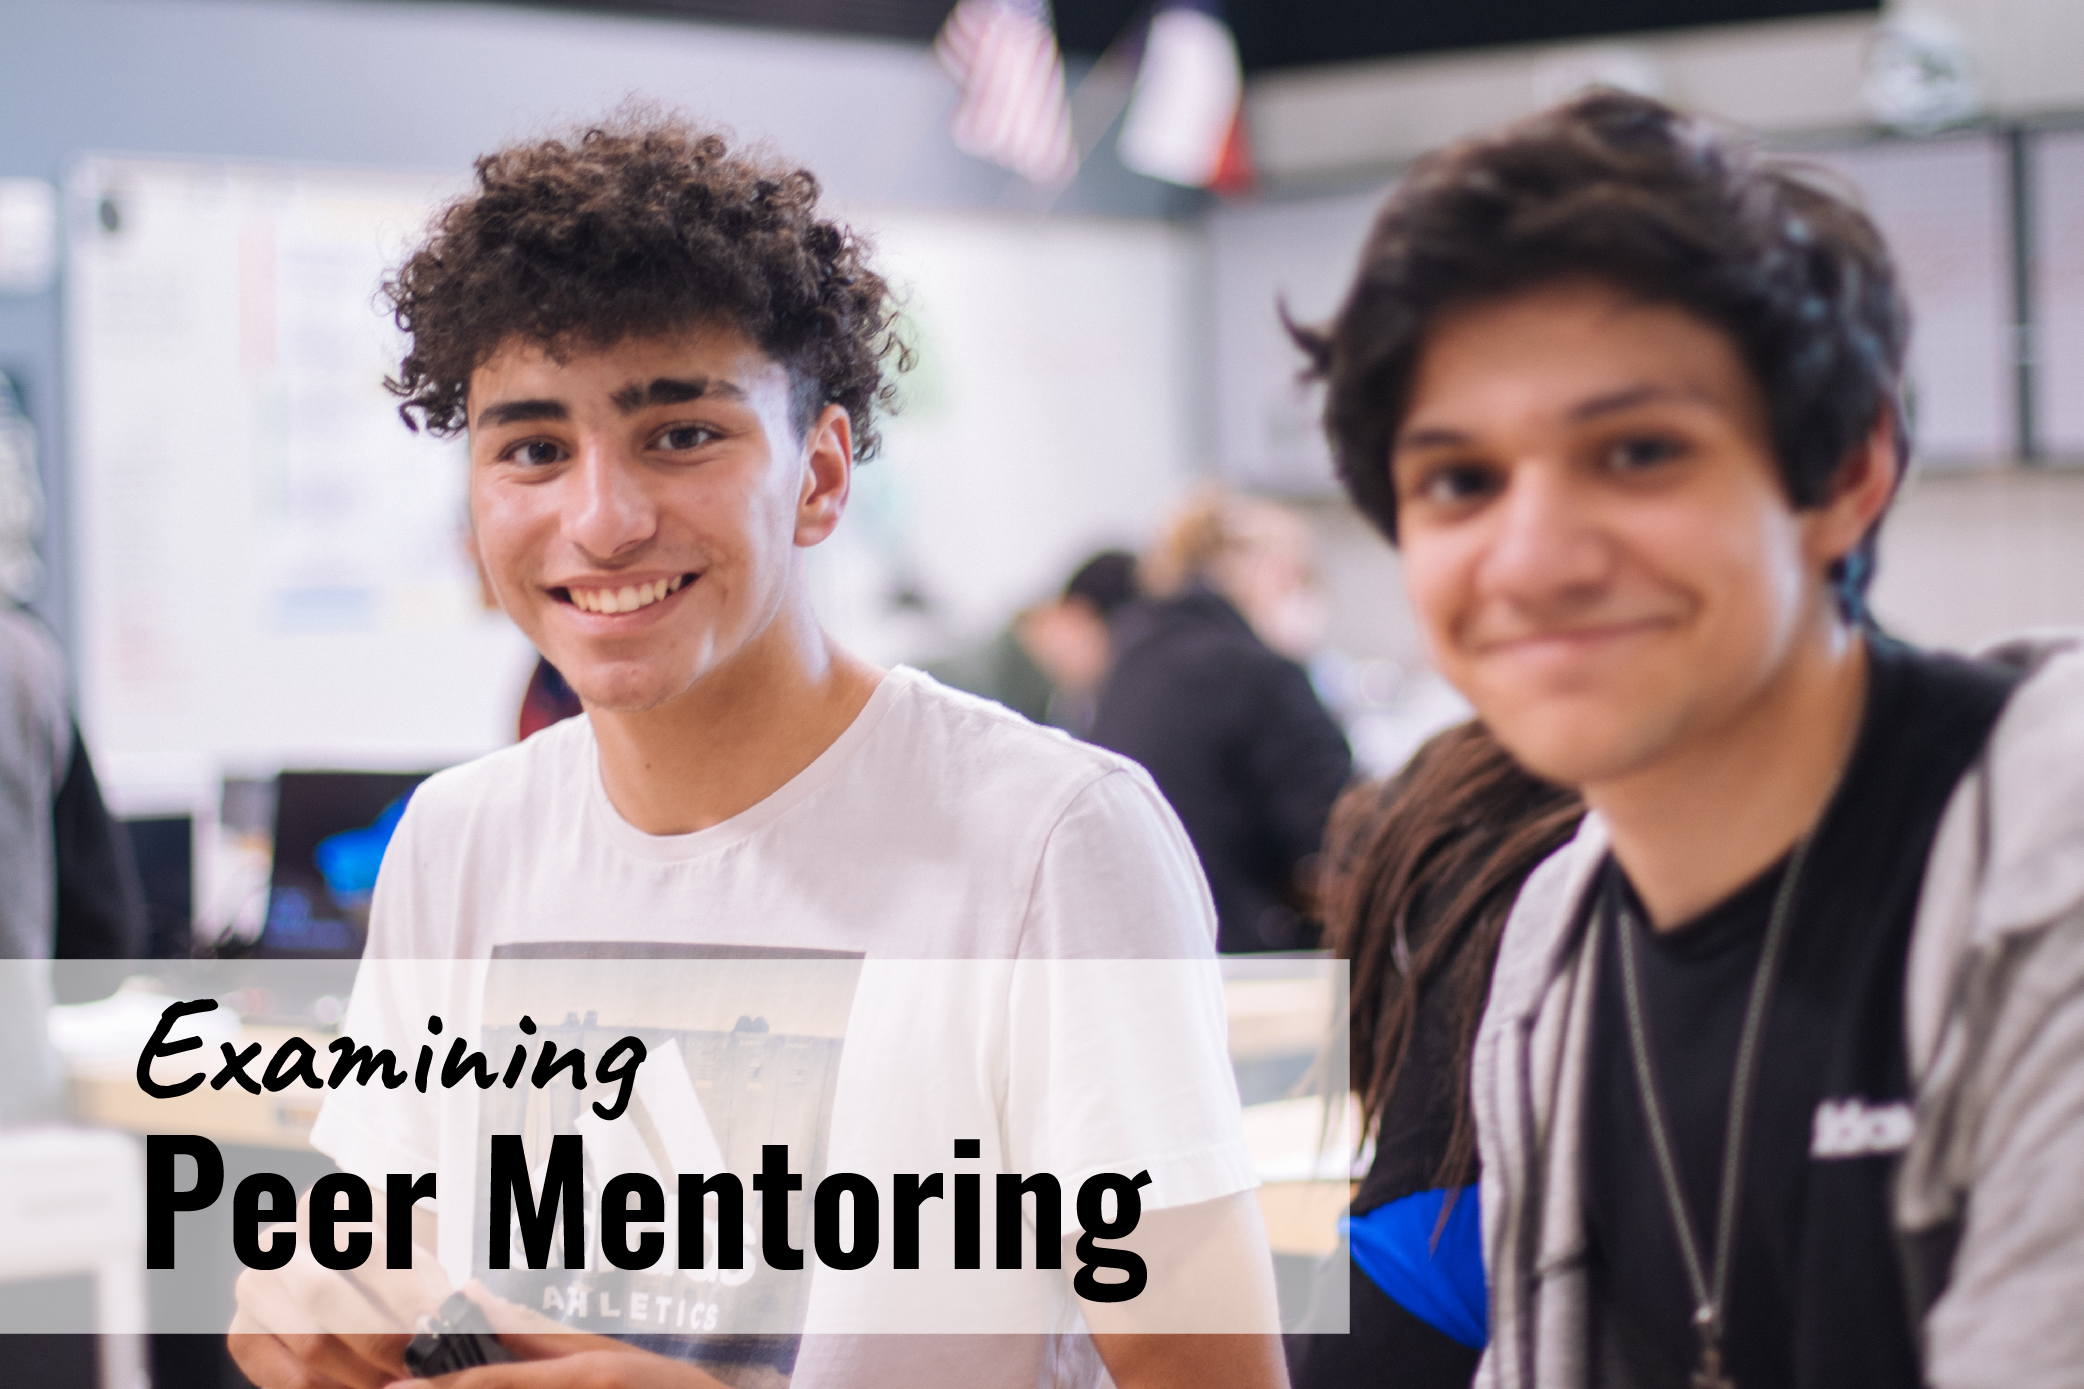 Two male students smile at the camera, with headline "Examining peer mentoring"